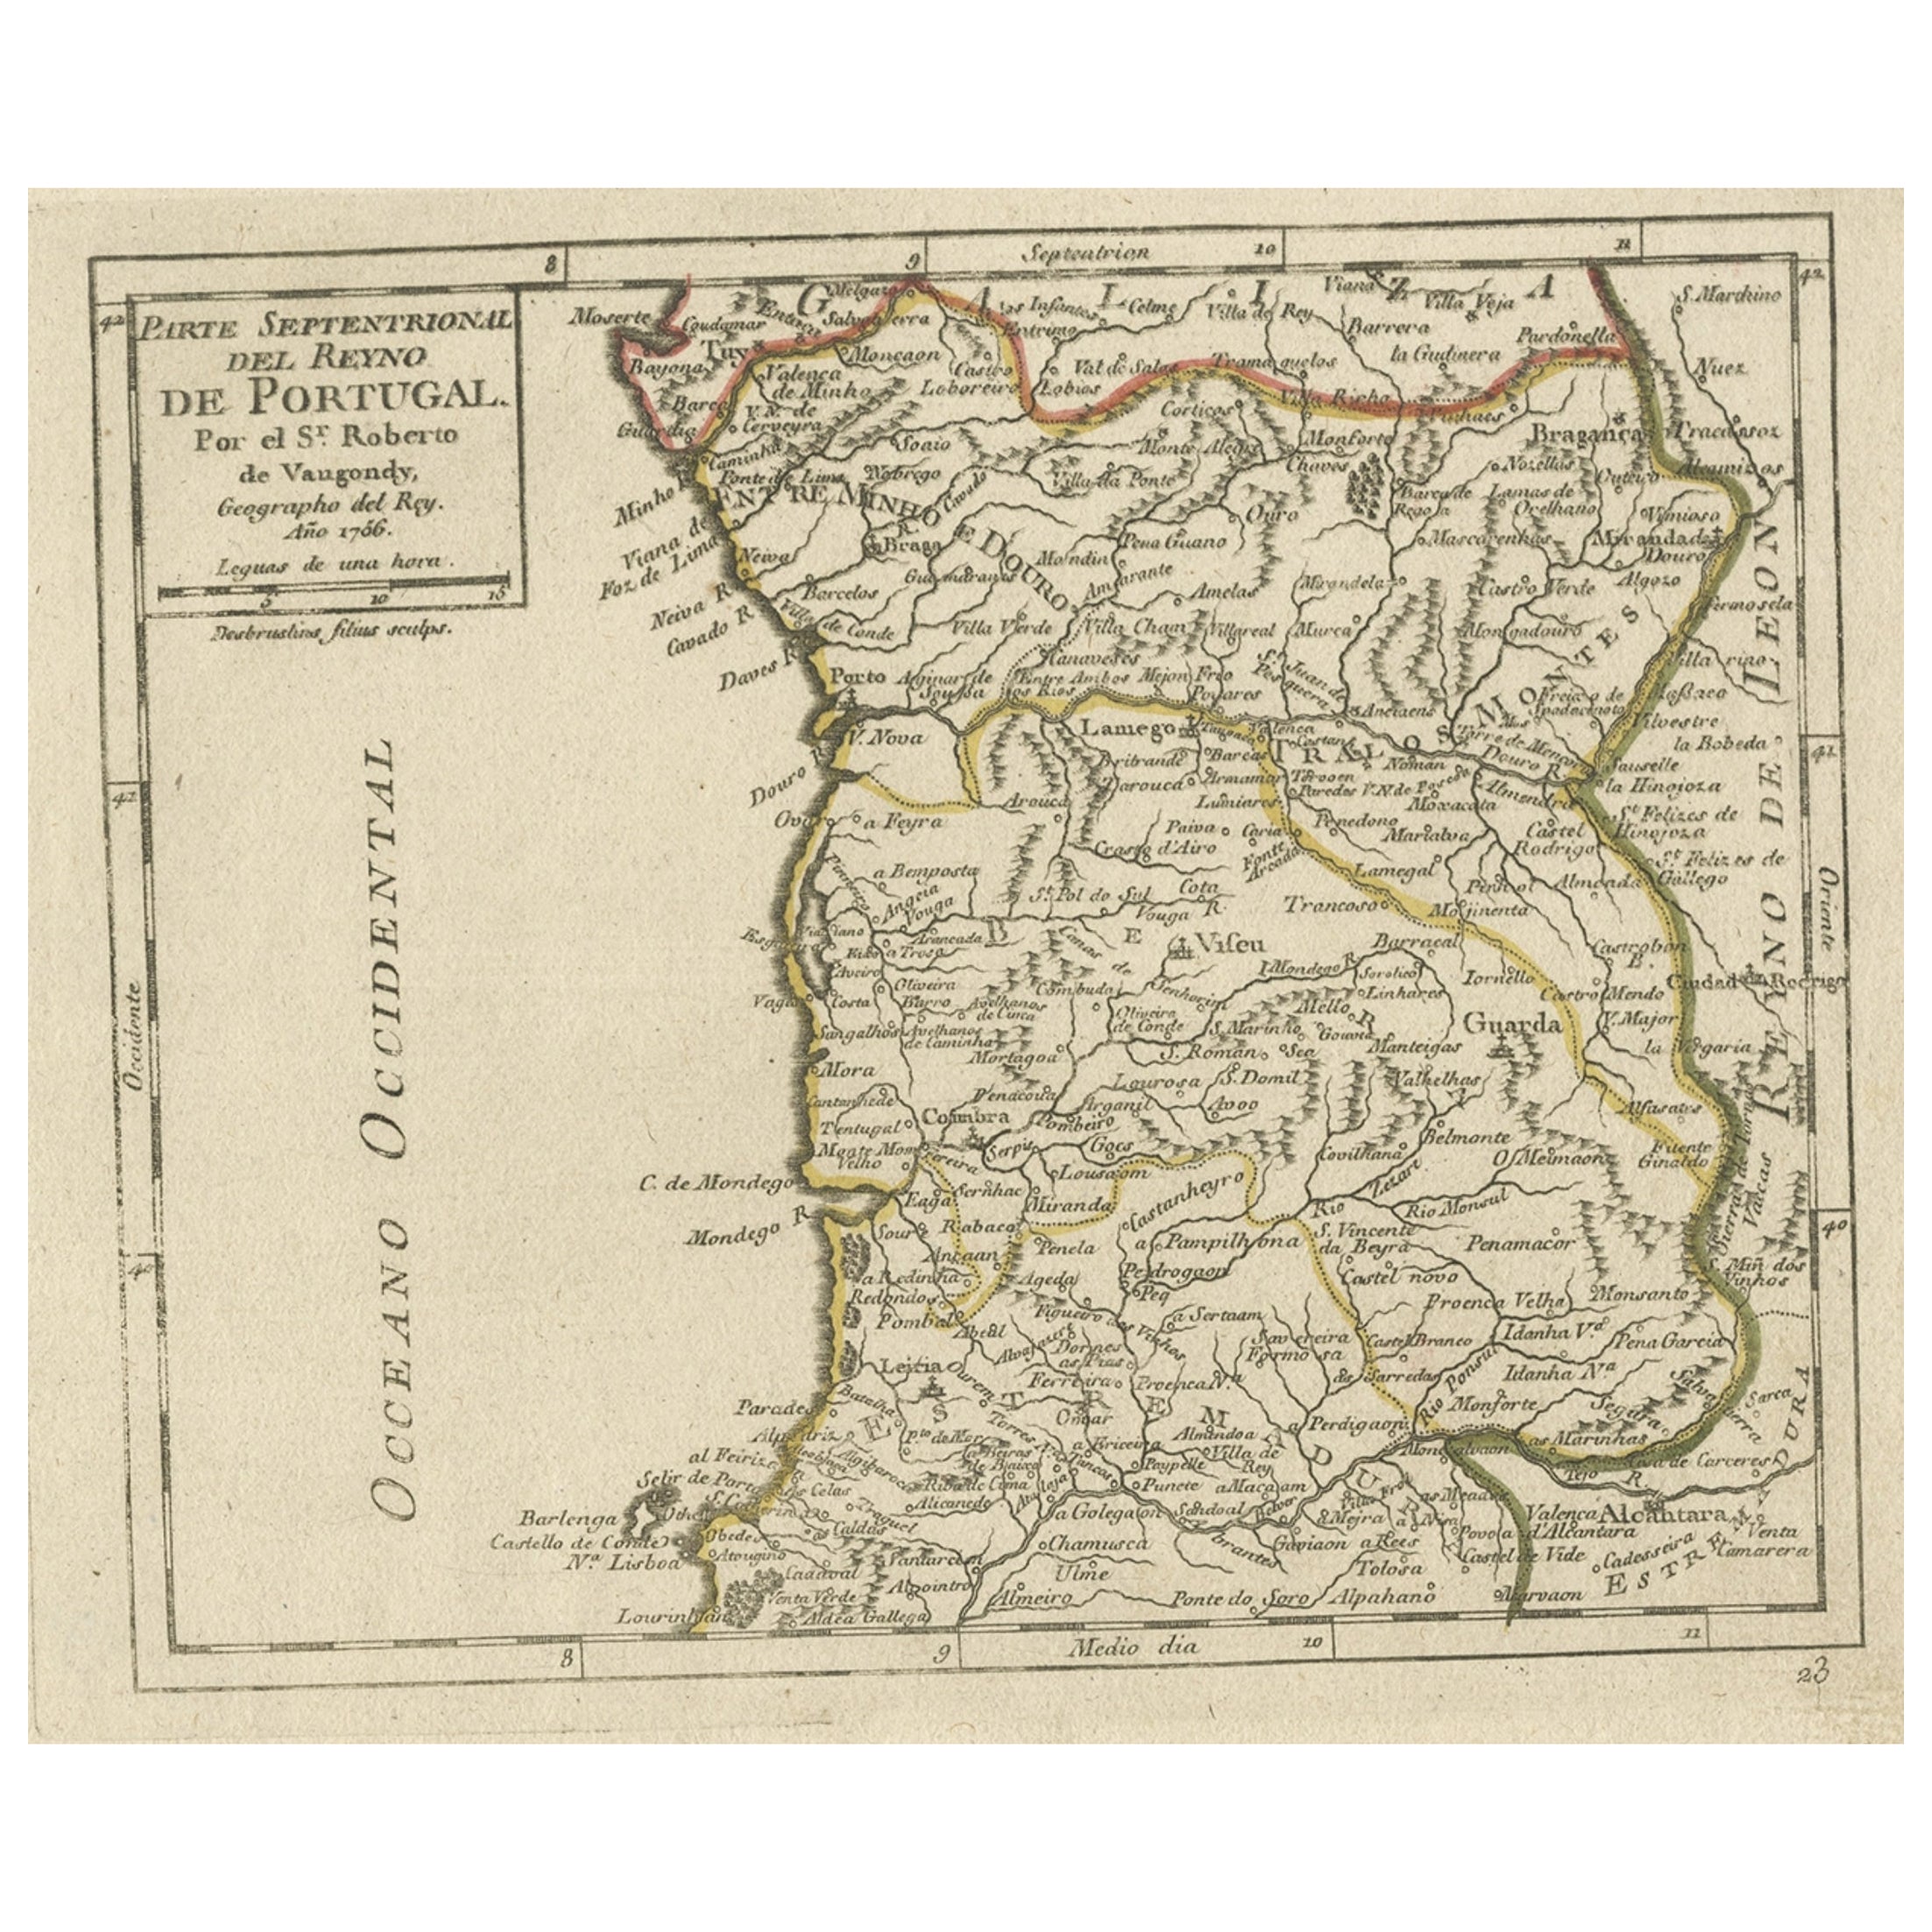 Antique Hand-Colored Map of Northern Portugal, 1756